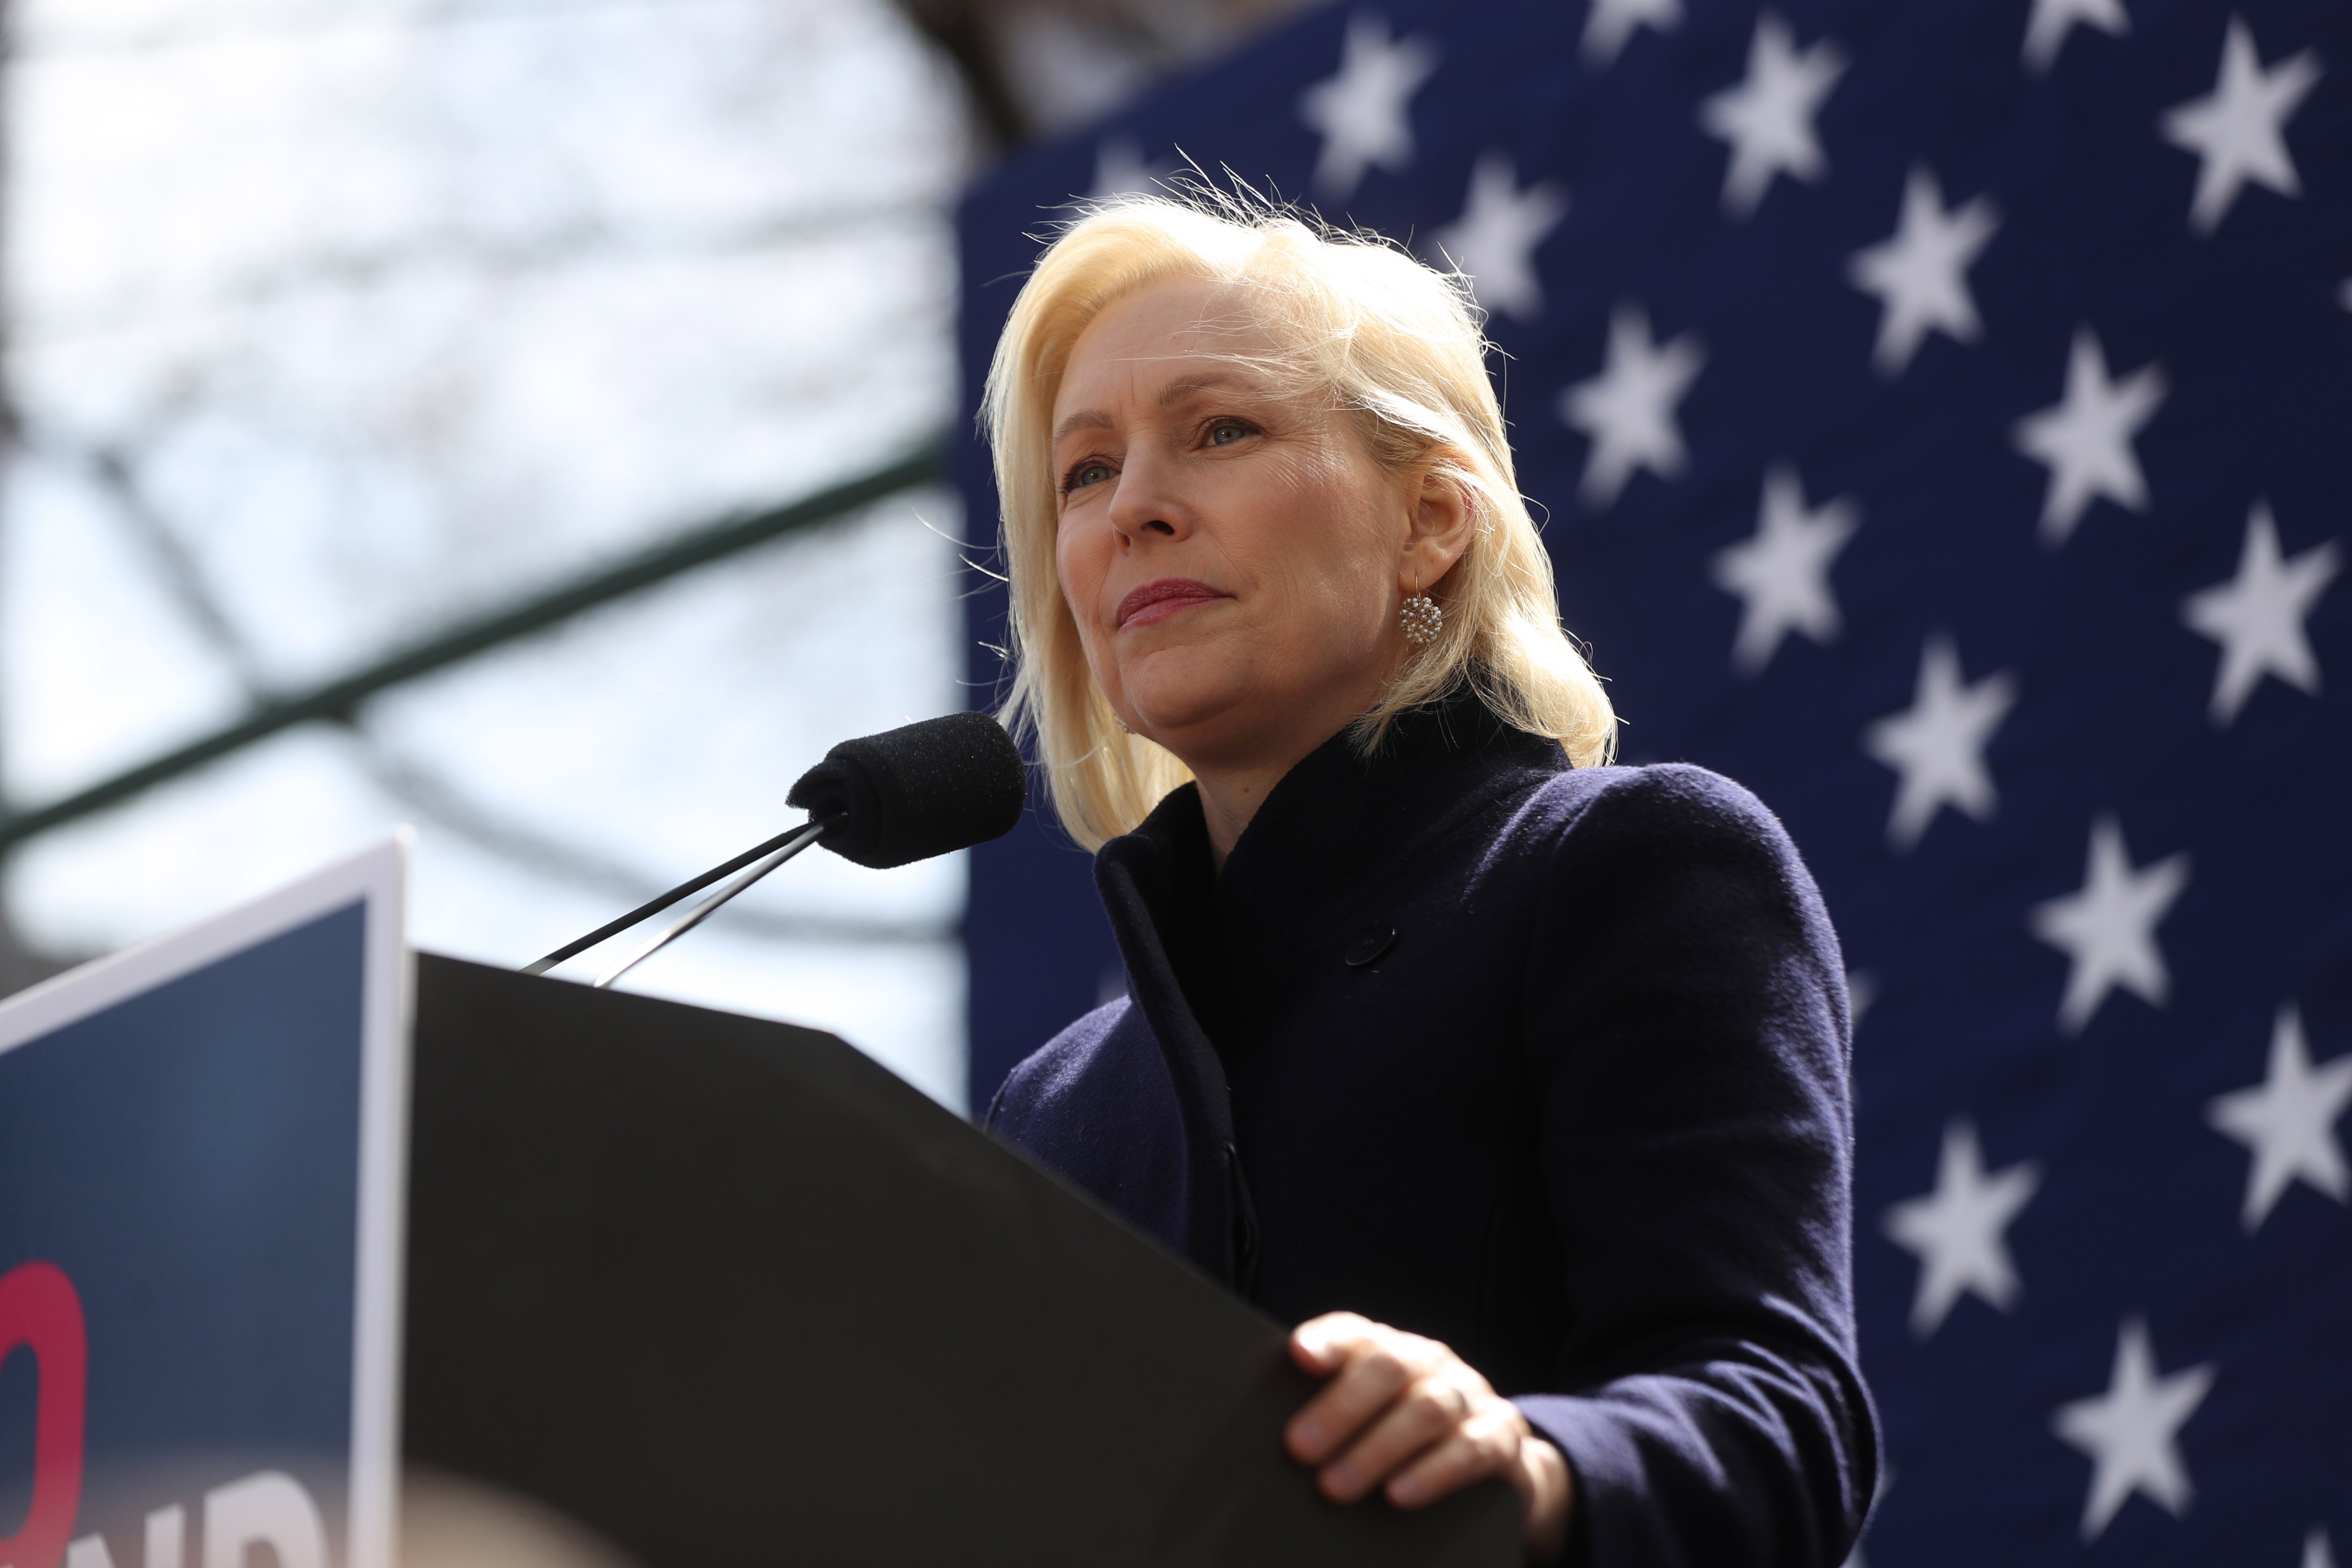 Democratic presidential candidate Sen. Kirsten Gillibrand speaks during a rally in front of Trump International Hotel in New York, United States on March 22, 2019. (Anadolu Agency—Getty Images Democratic presidential candidate Sen. Kirsten Gillibrand speaks during a rally in front of Trump International Hotel in New York, United States on March 22, 2019.)